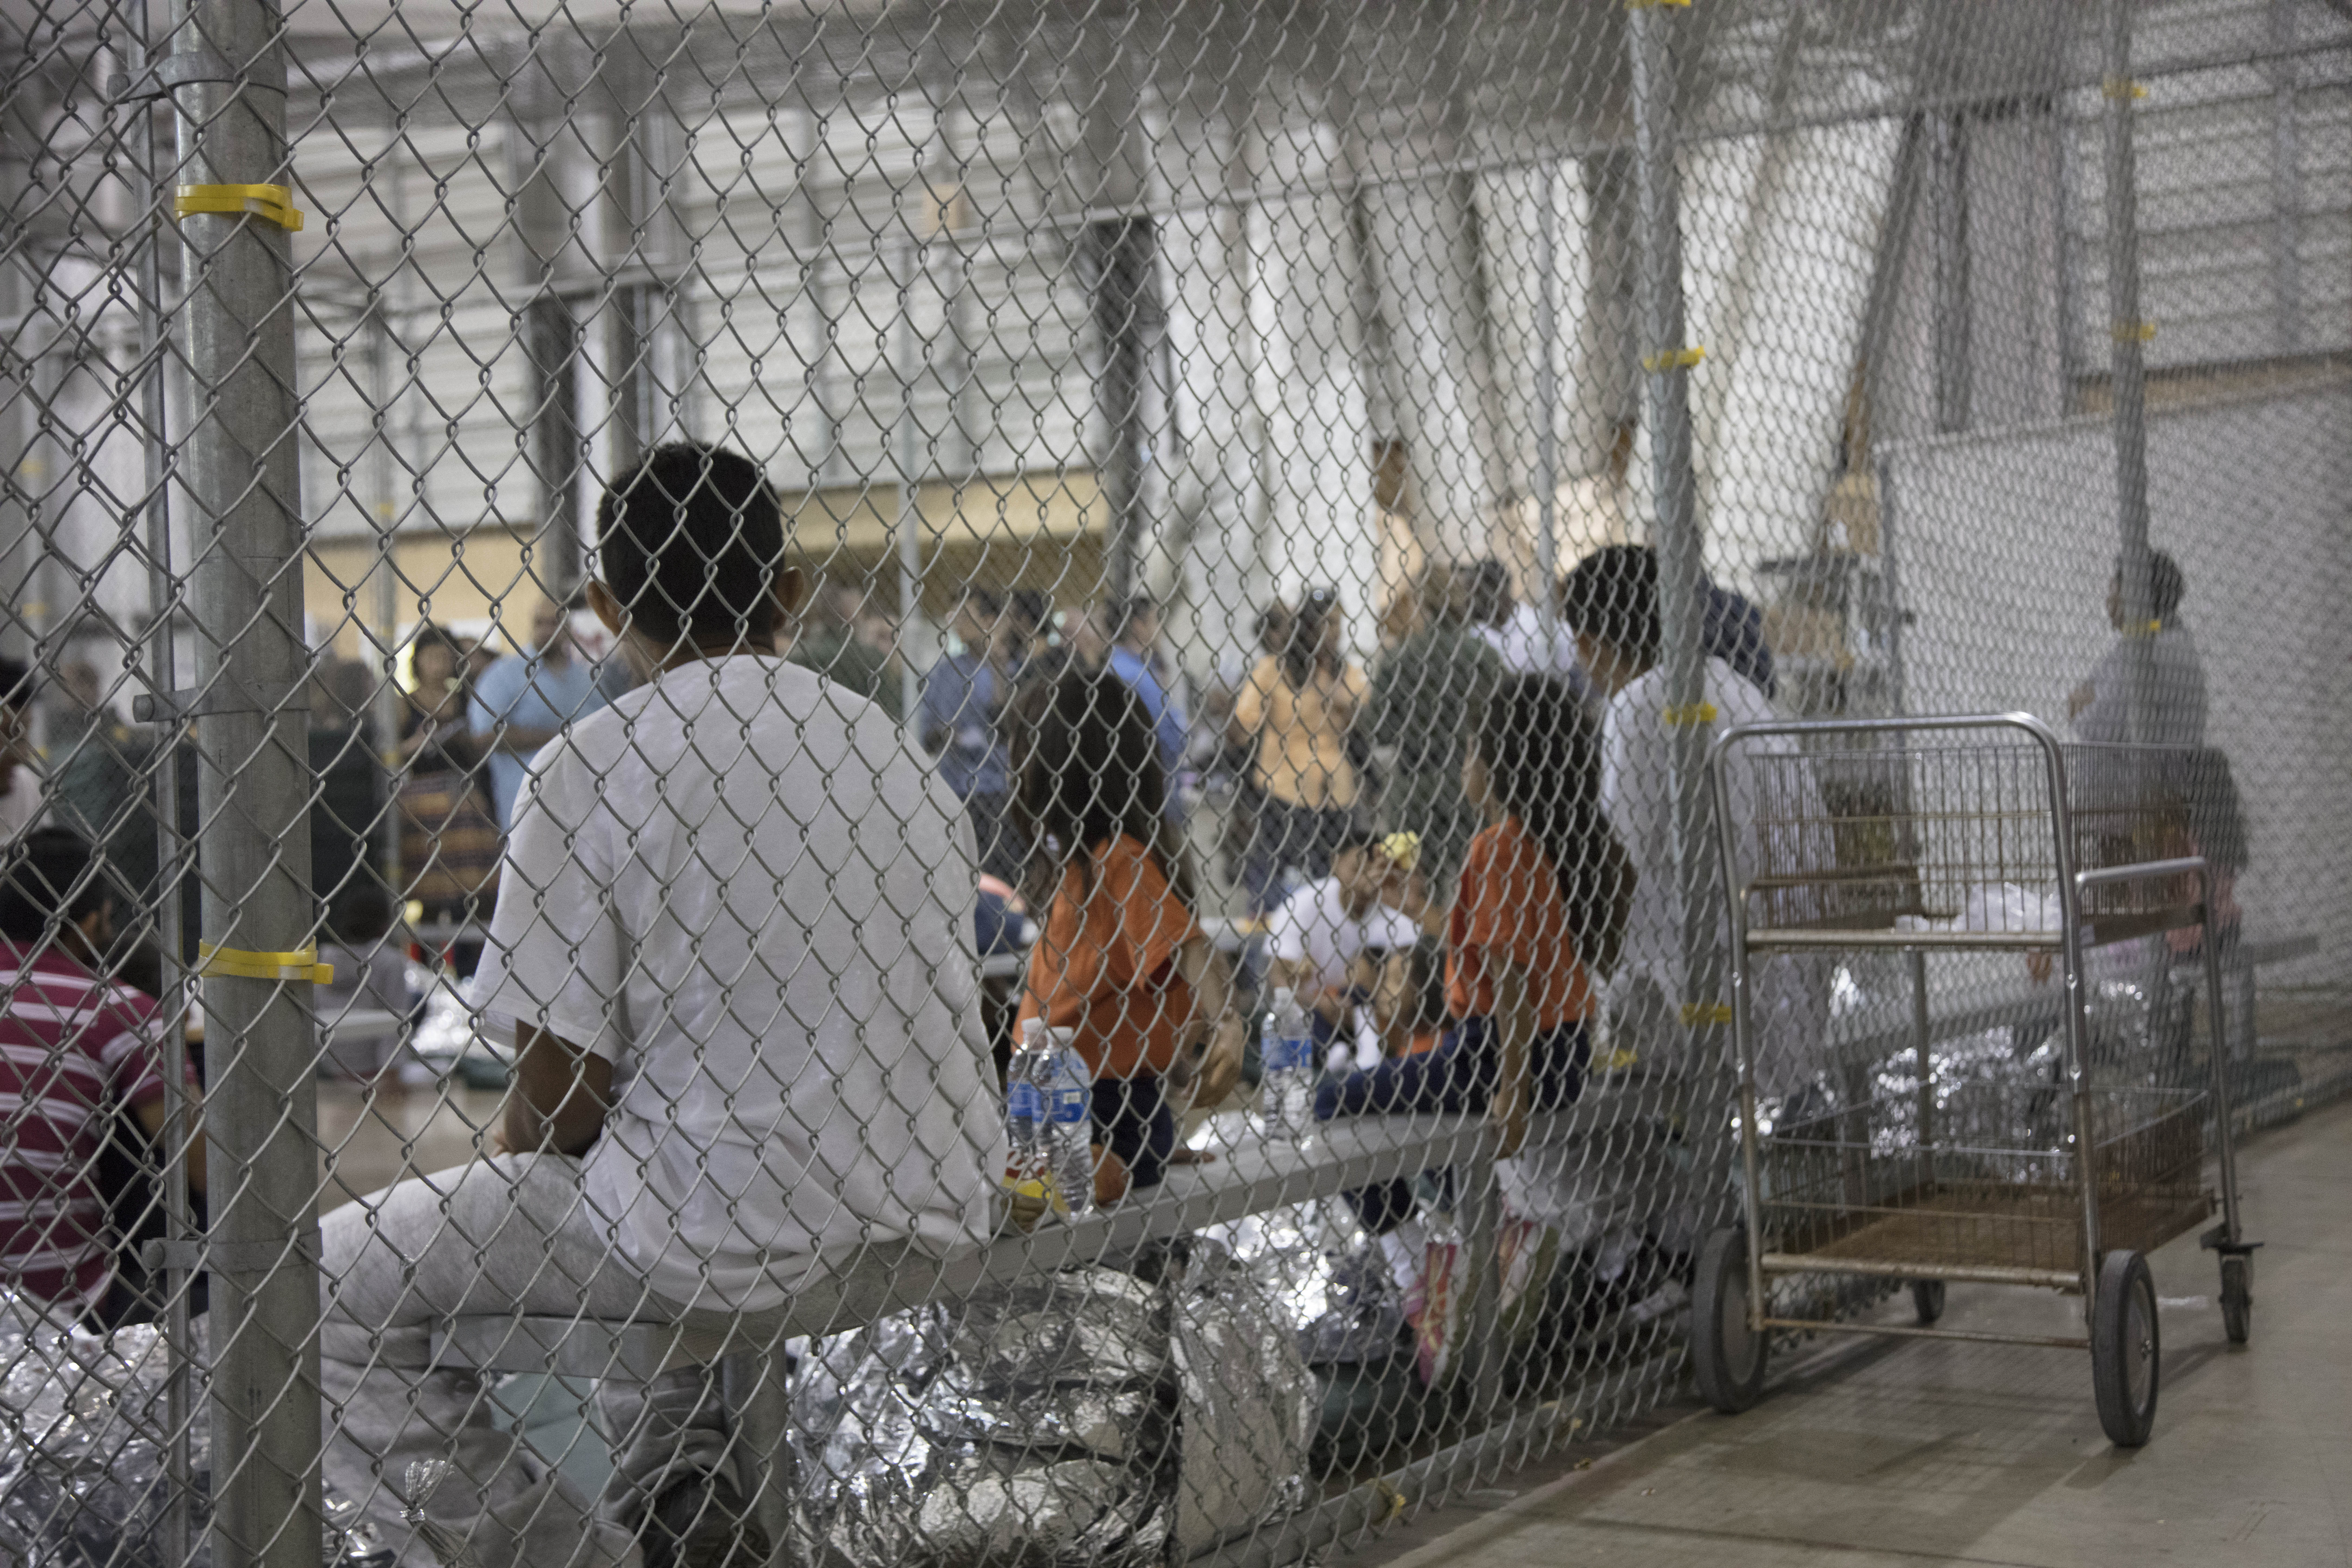 ACLU seeks records of Trump administration COVID-19 response in immigrant detention centers